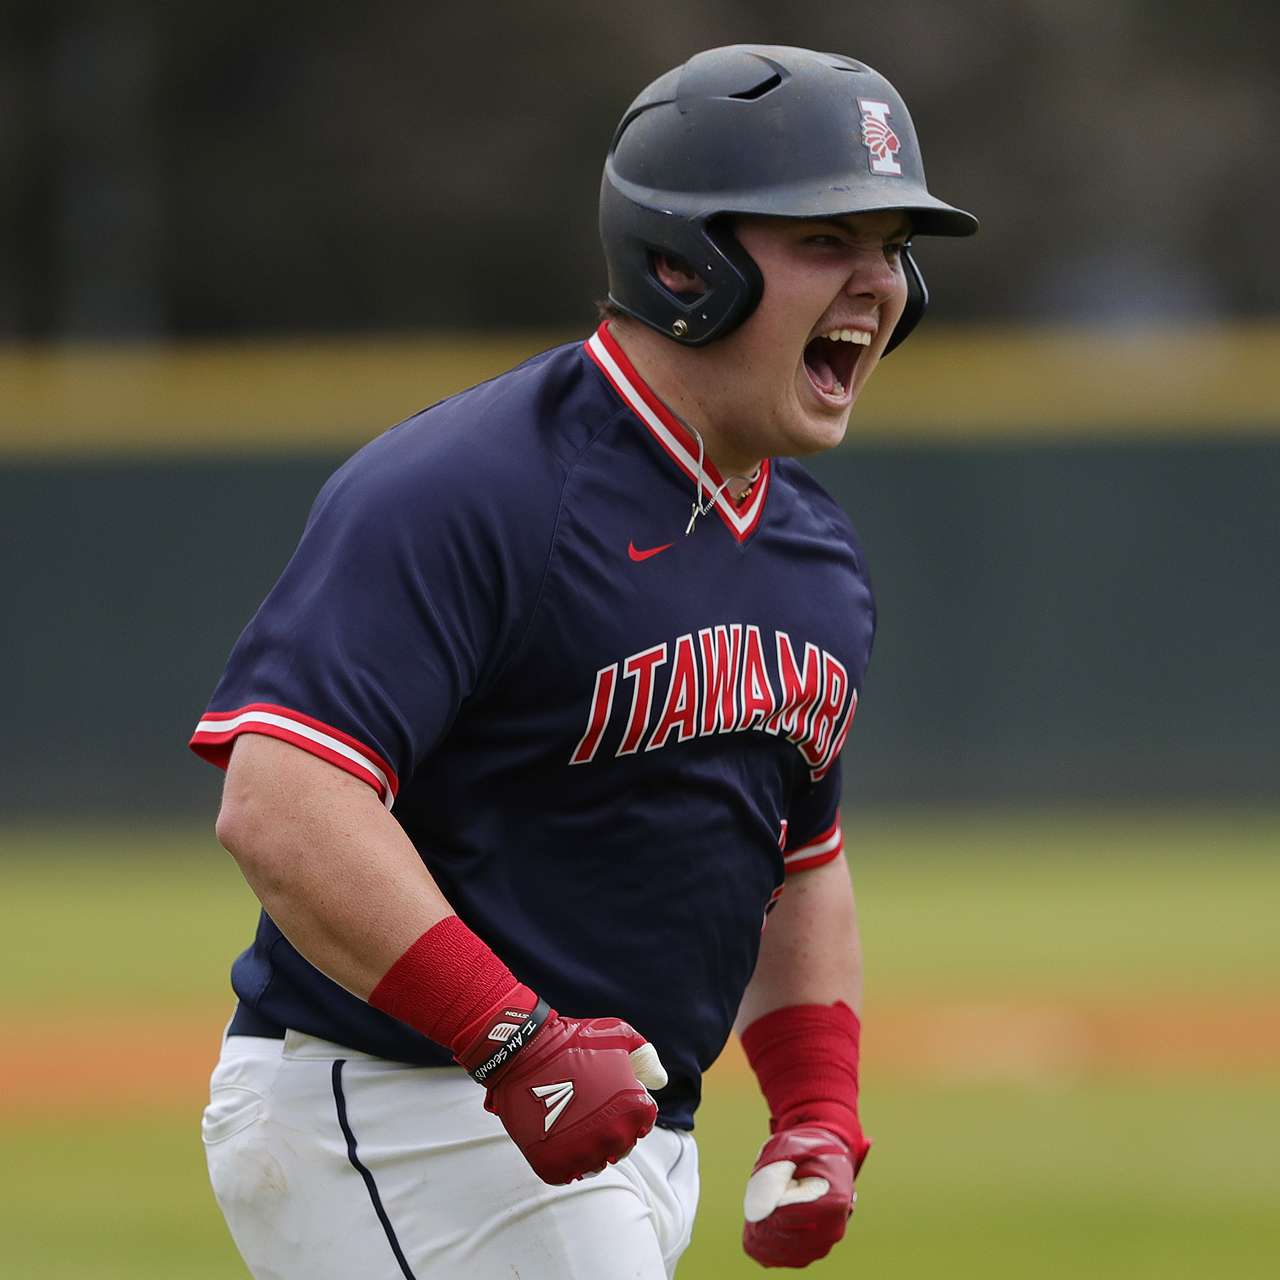 Indians sweep Southwest Tennessee in season opener